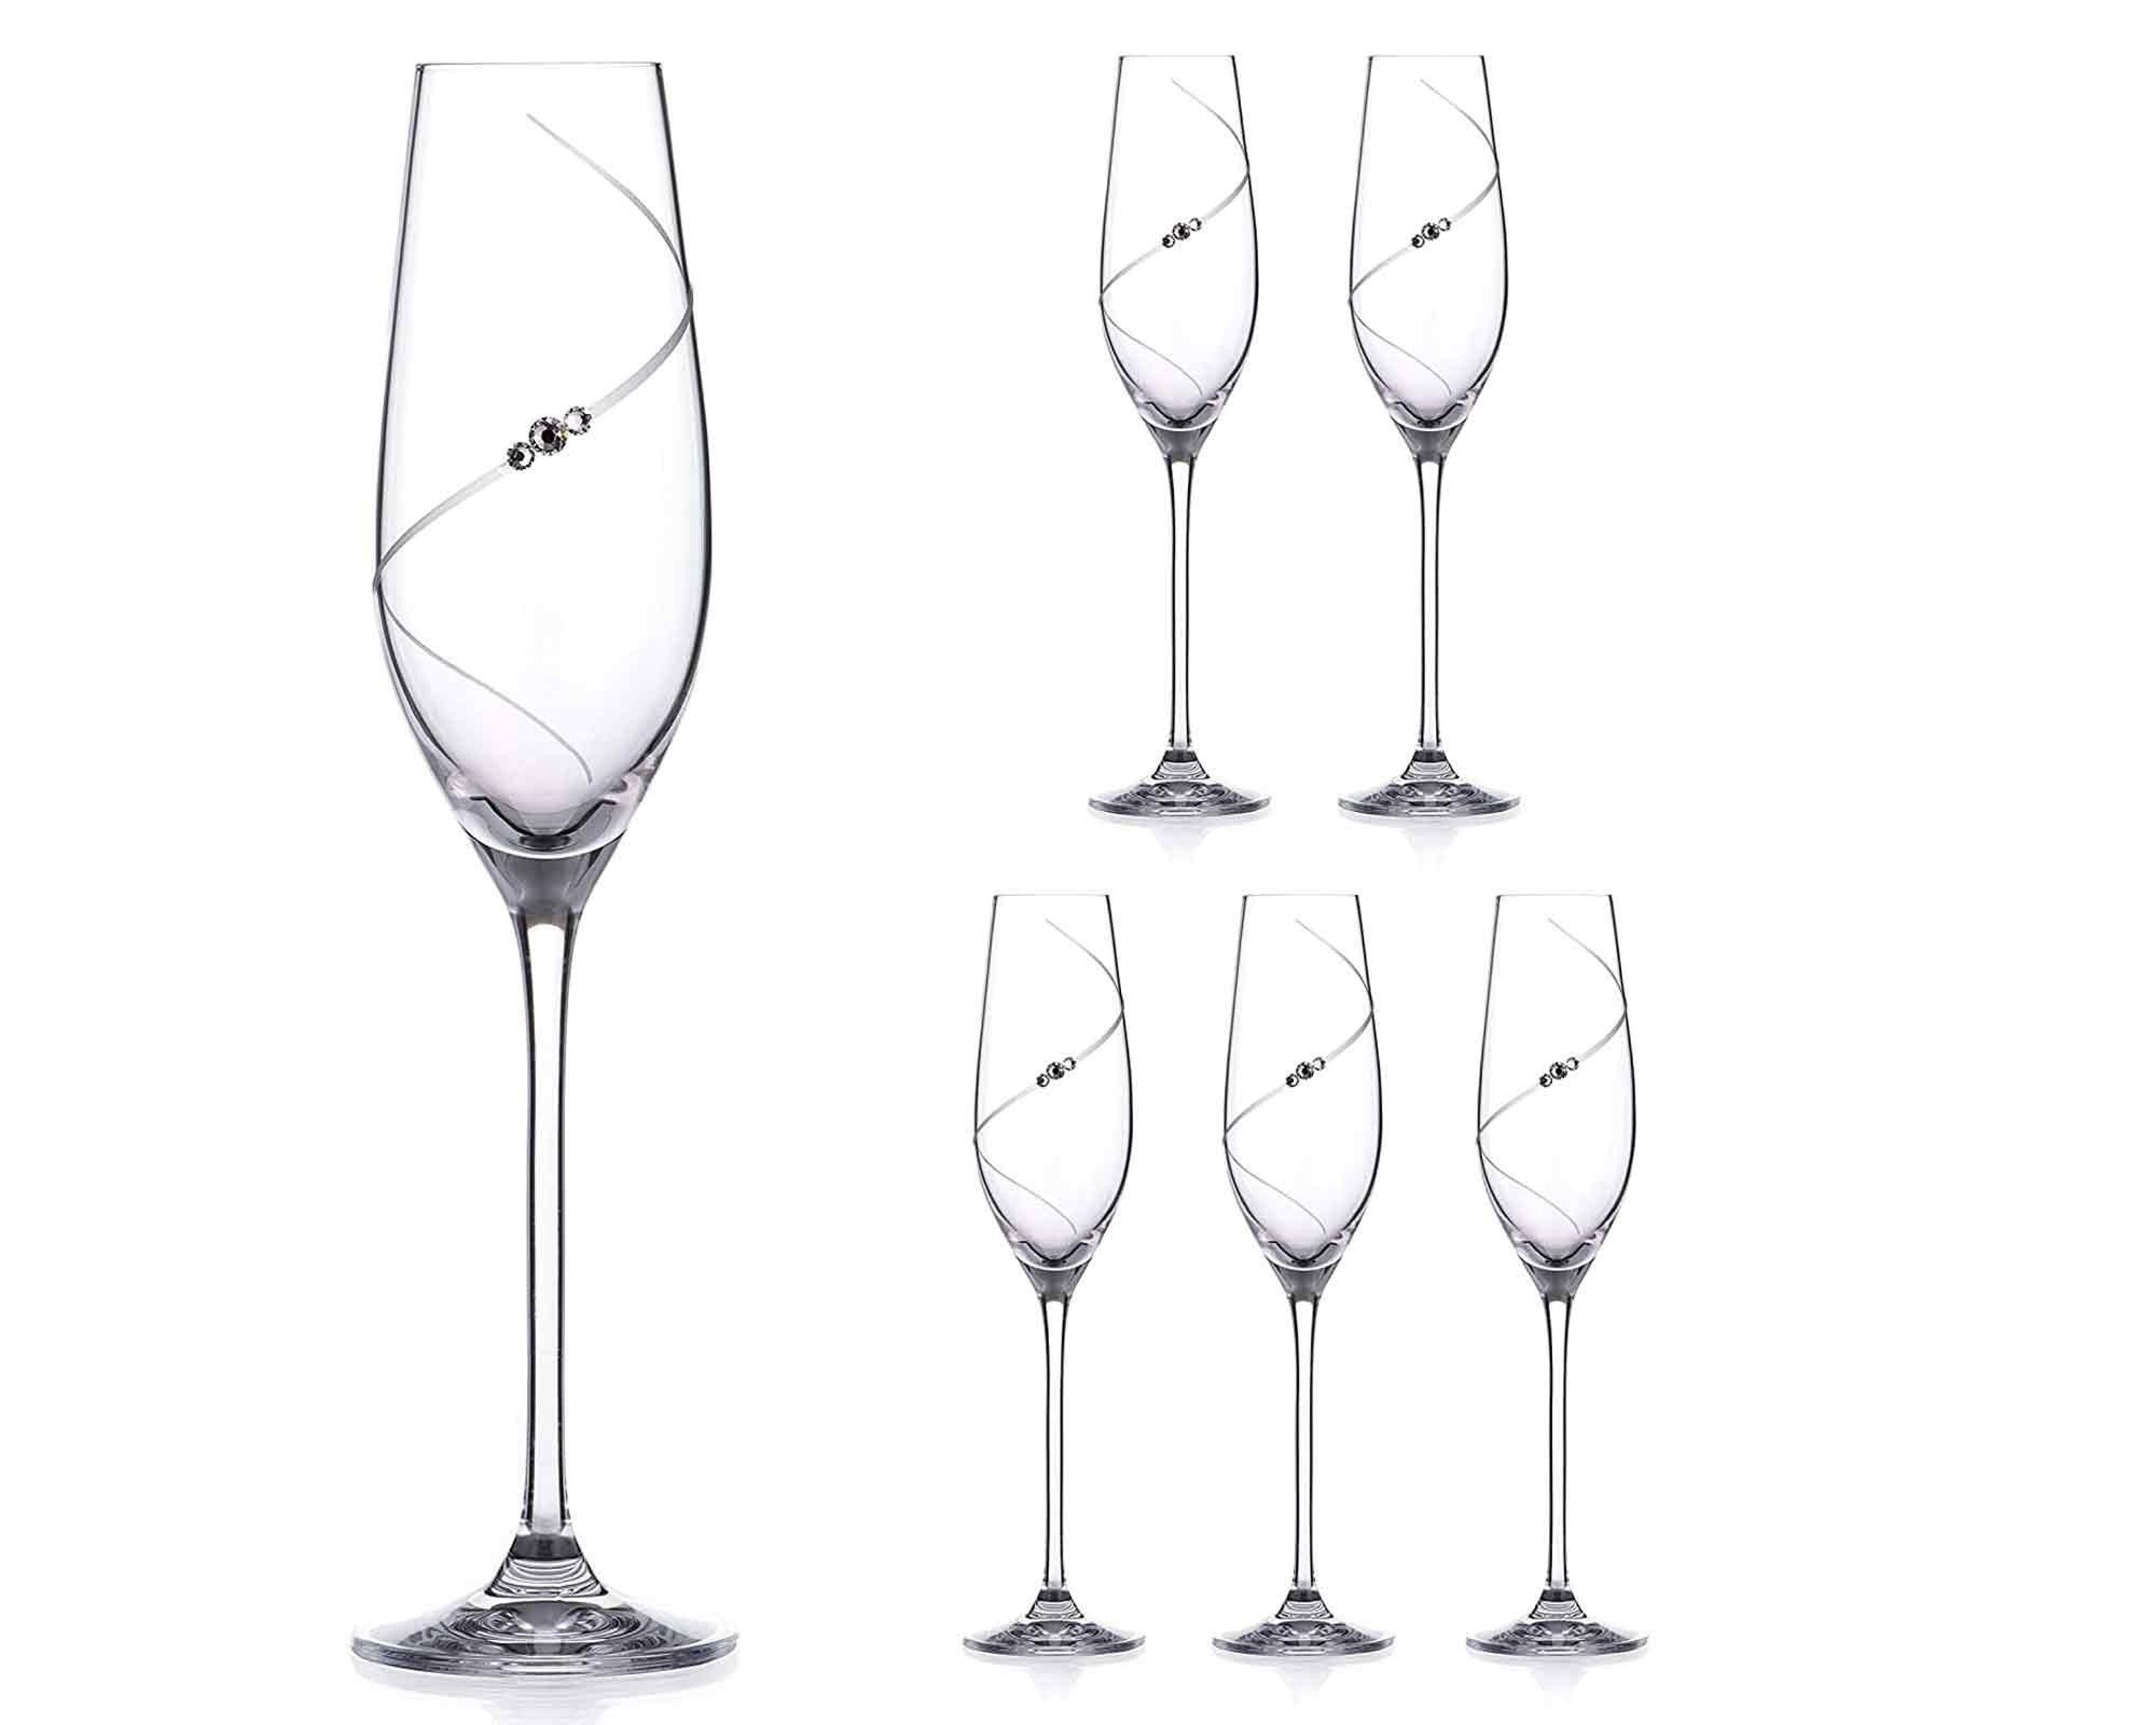 DIAMANTE Prosecco Glasses Set of 4 Plain Undecorated Crystal